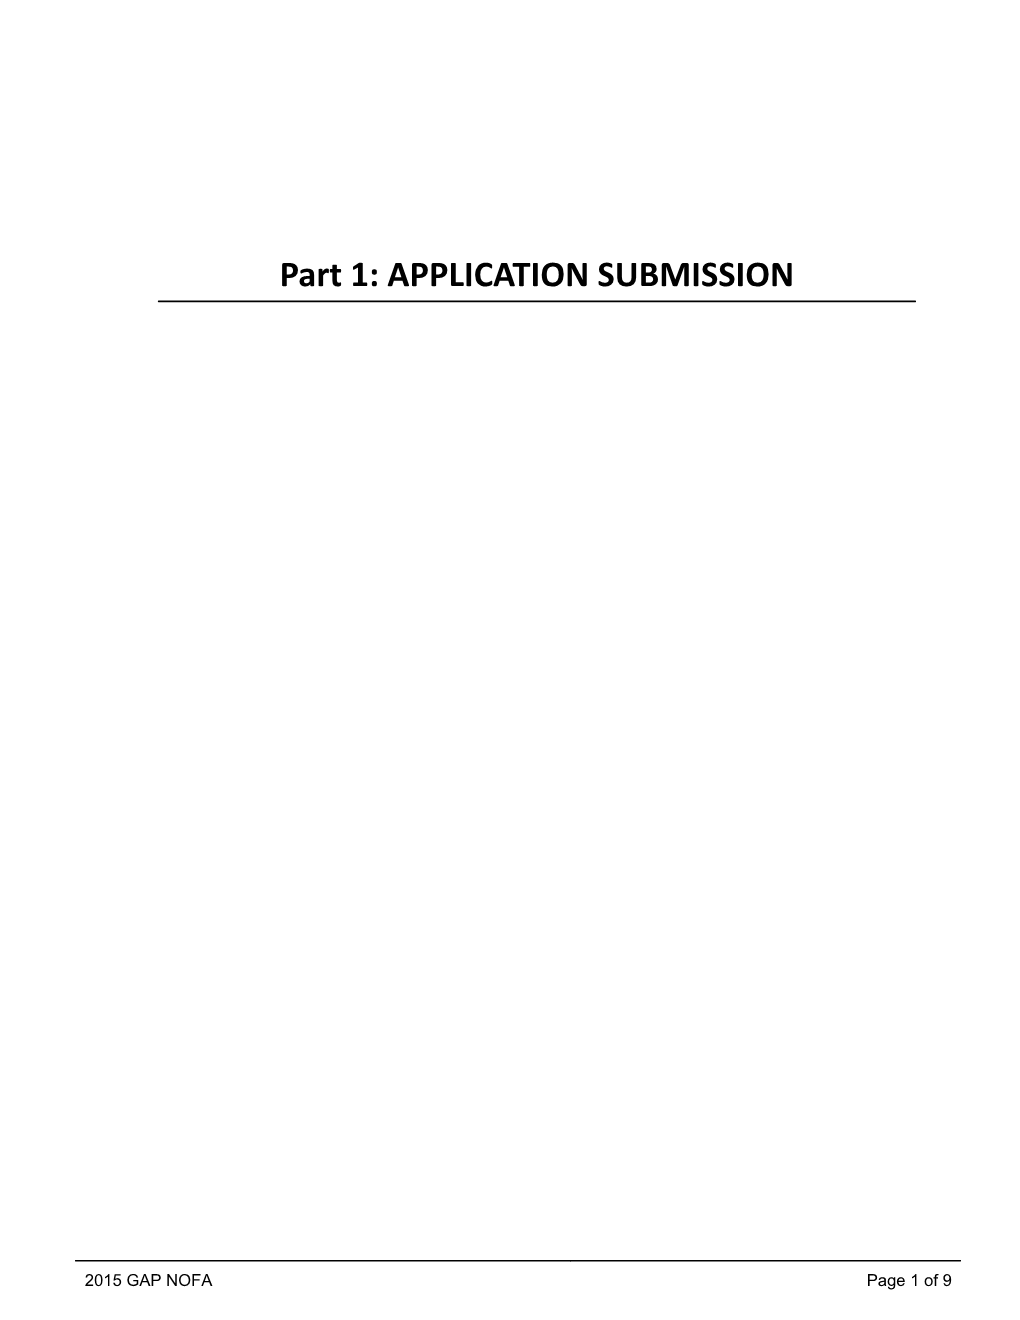 NOFA Instructions Part 1 - Application Submittal